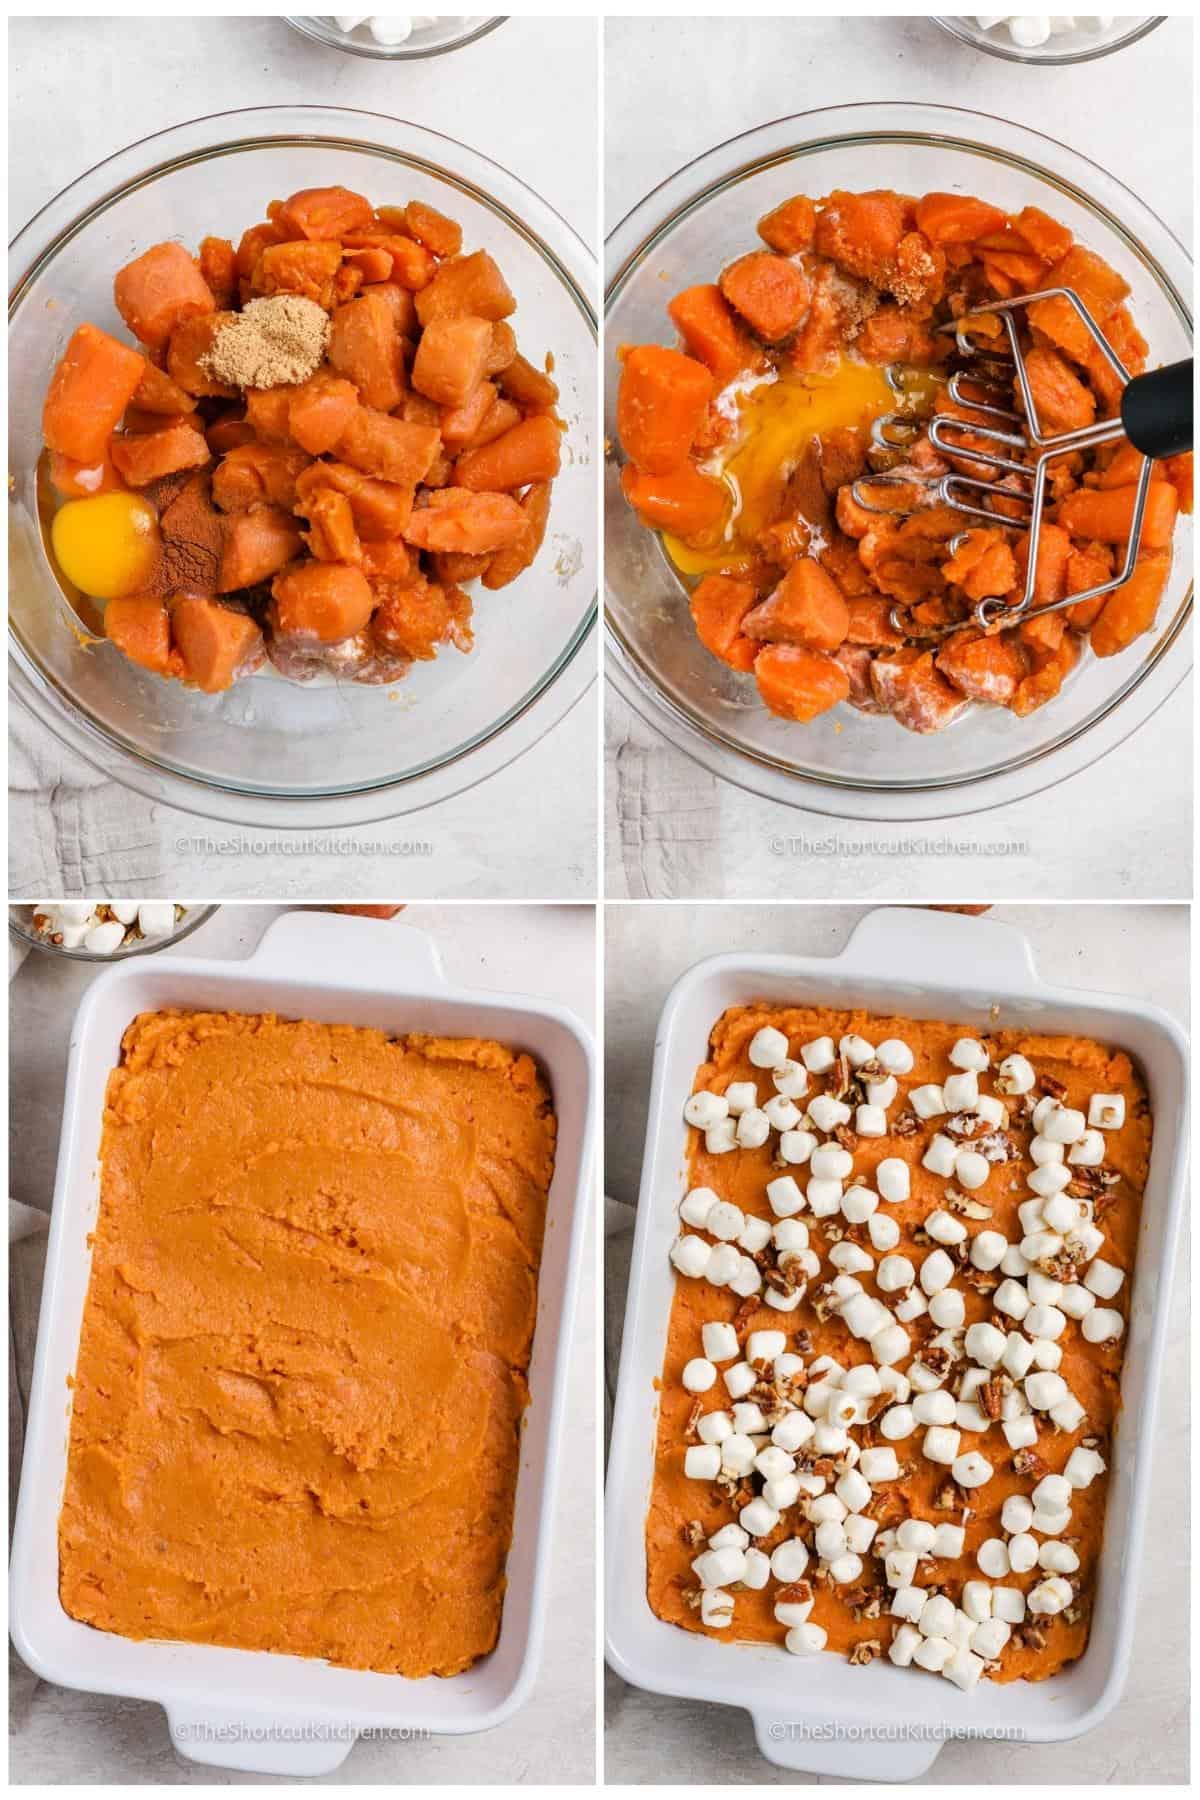 process of adding ingredients together to make Canned Sweet Potato Casserole